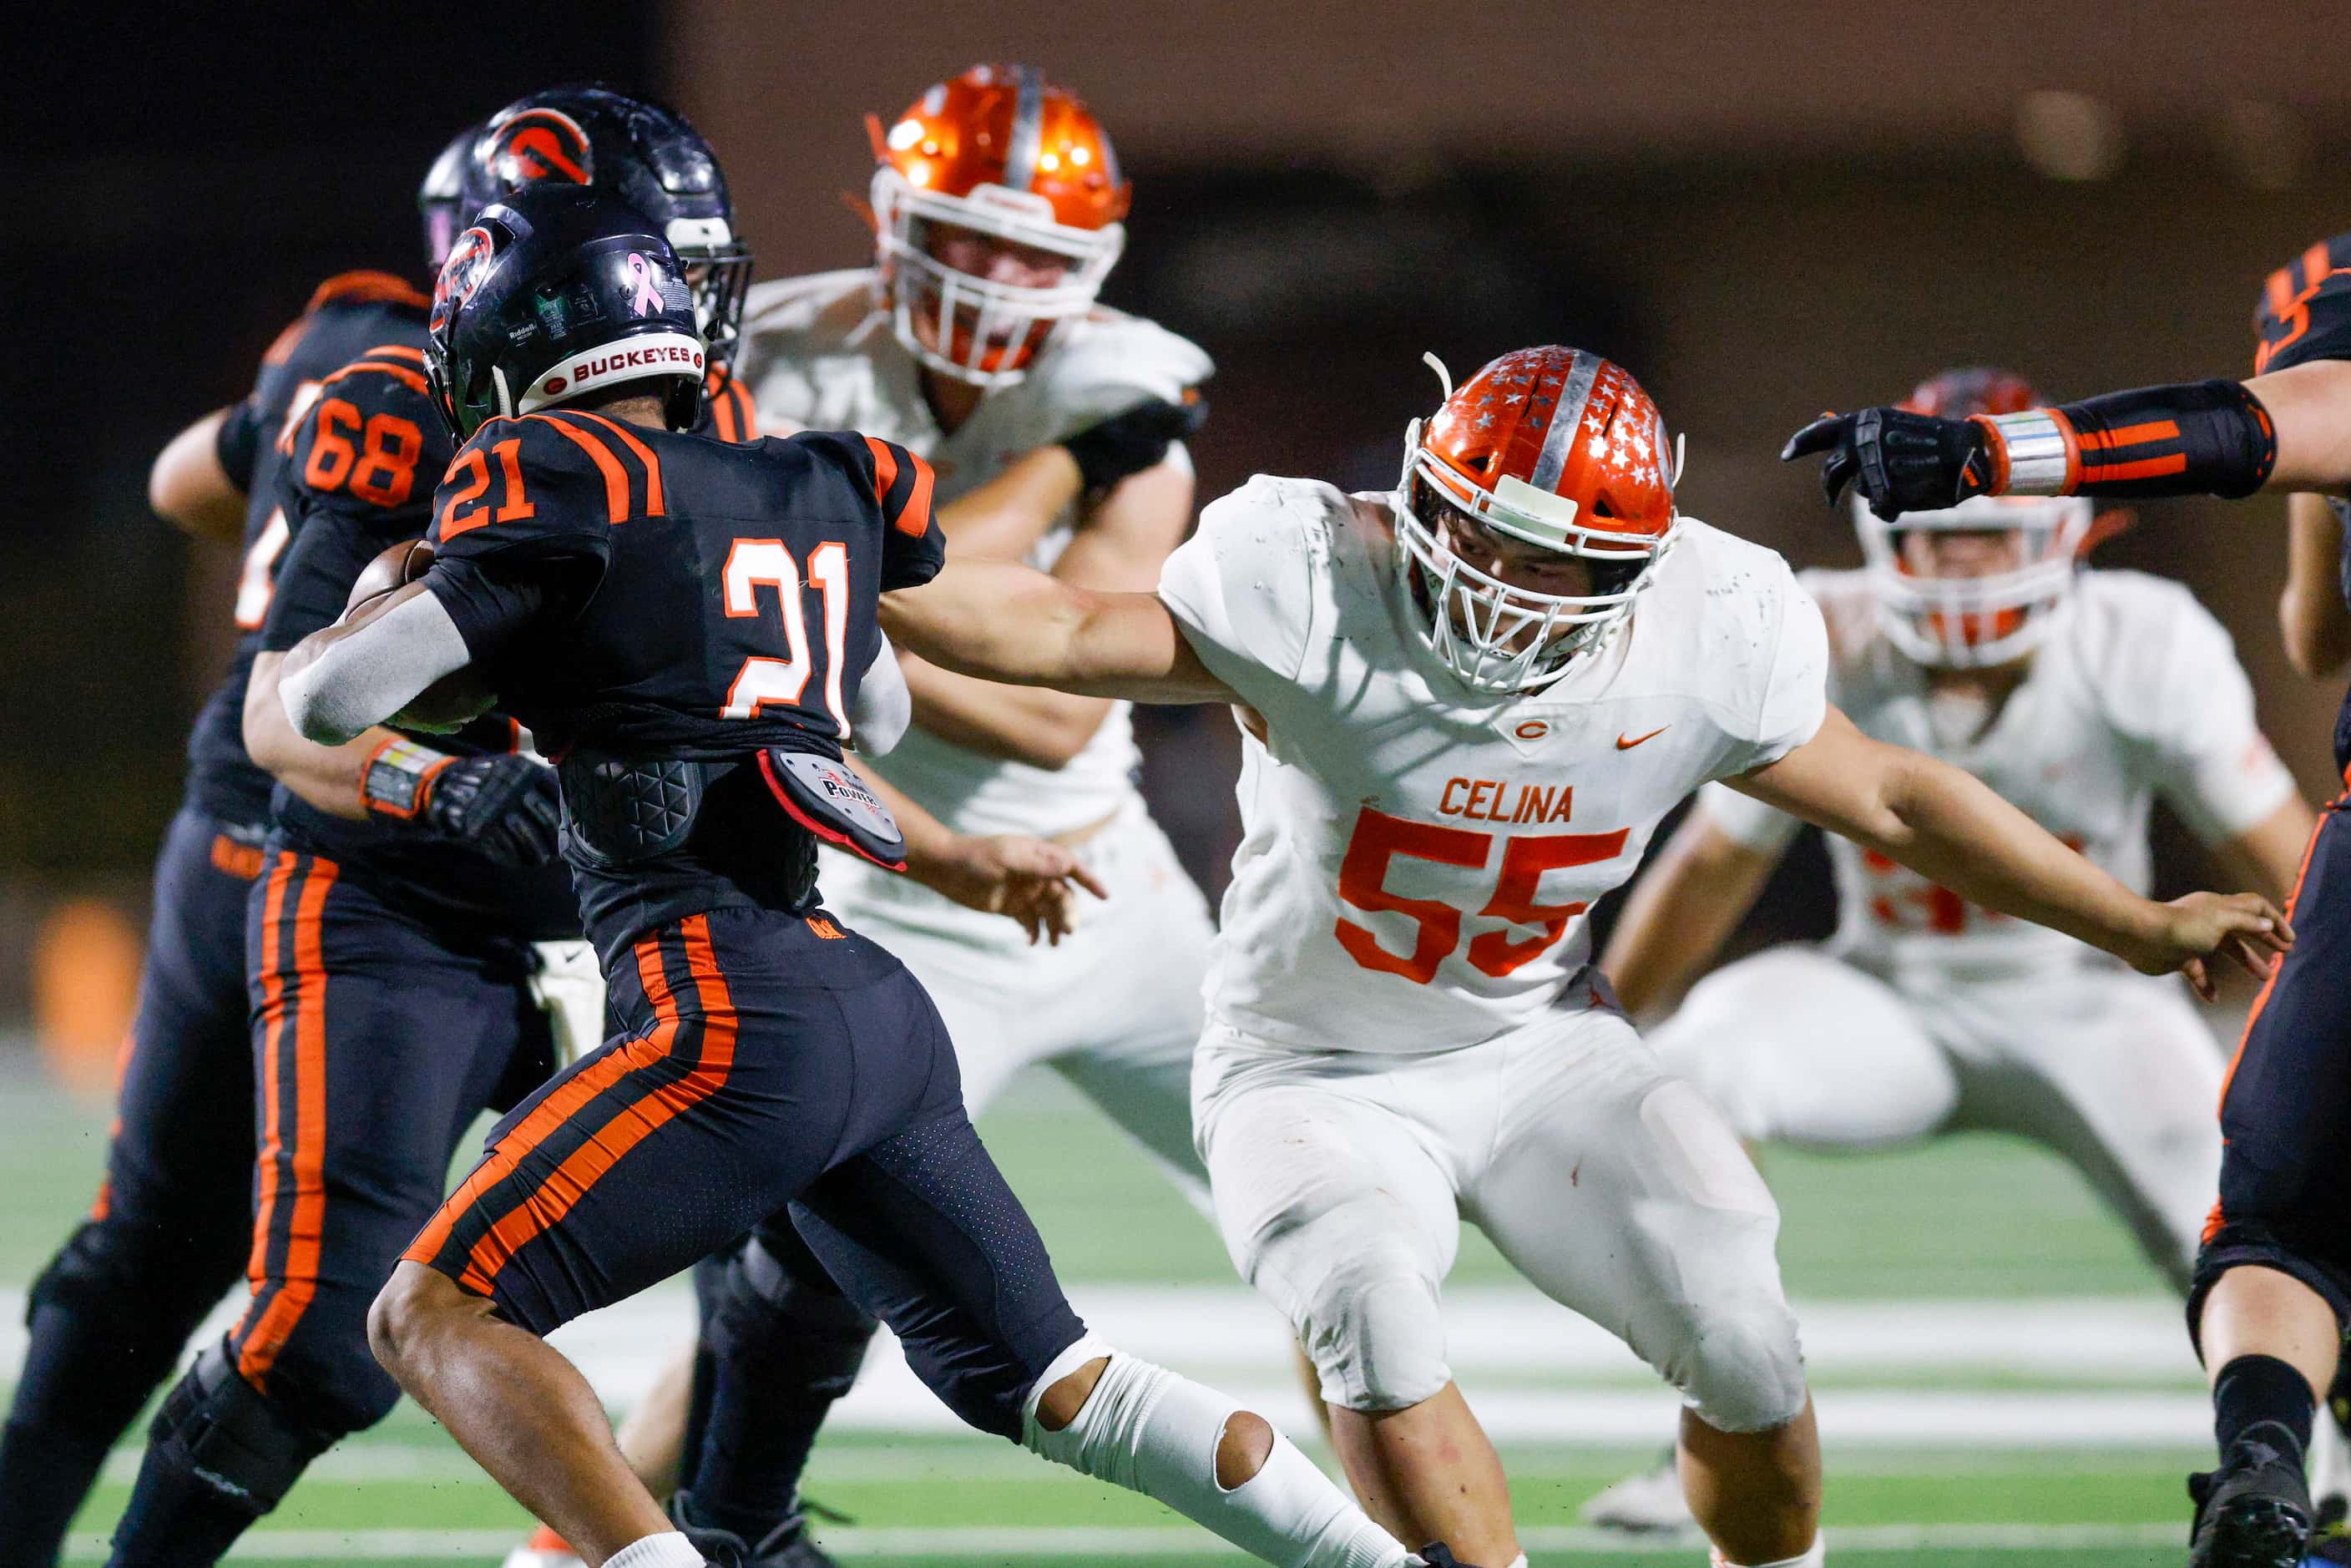 Celina defensive lineman William Pace (55) stretches to tackle Gilmer running back Ladaylon...